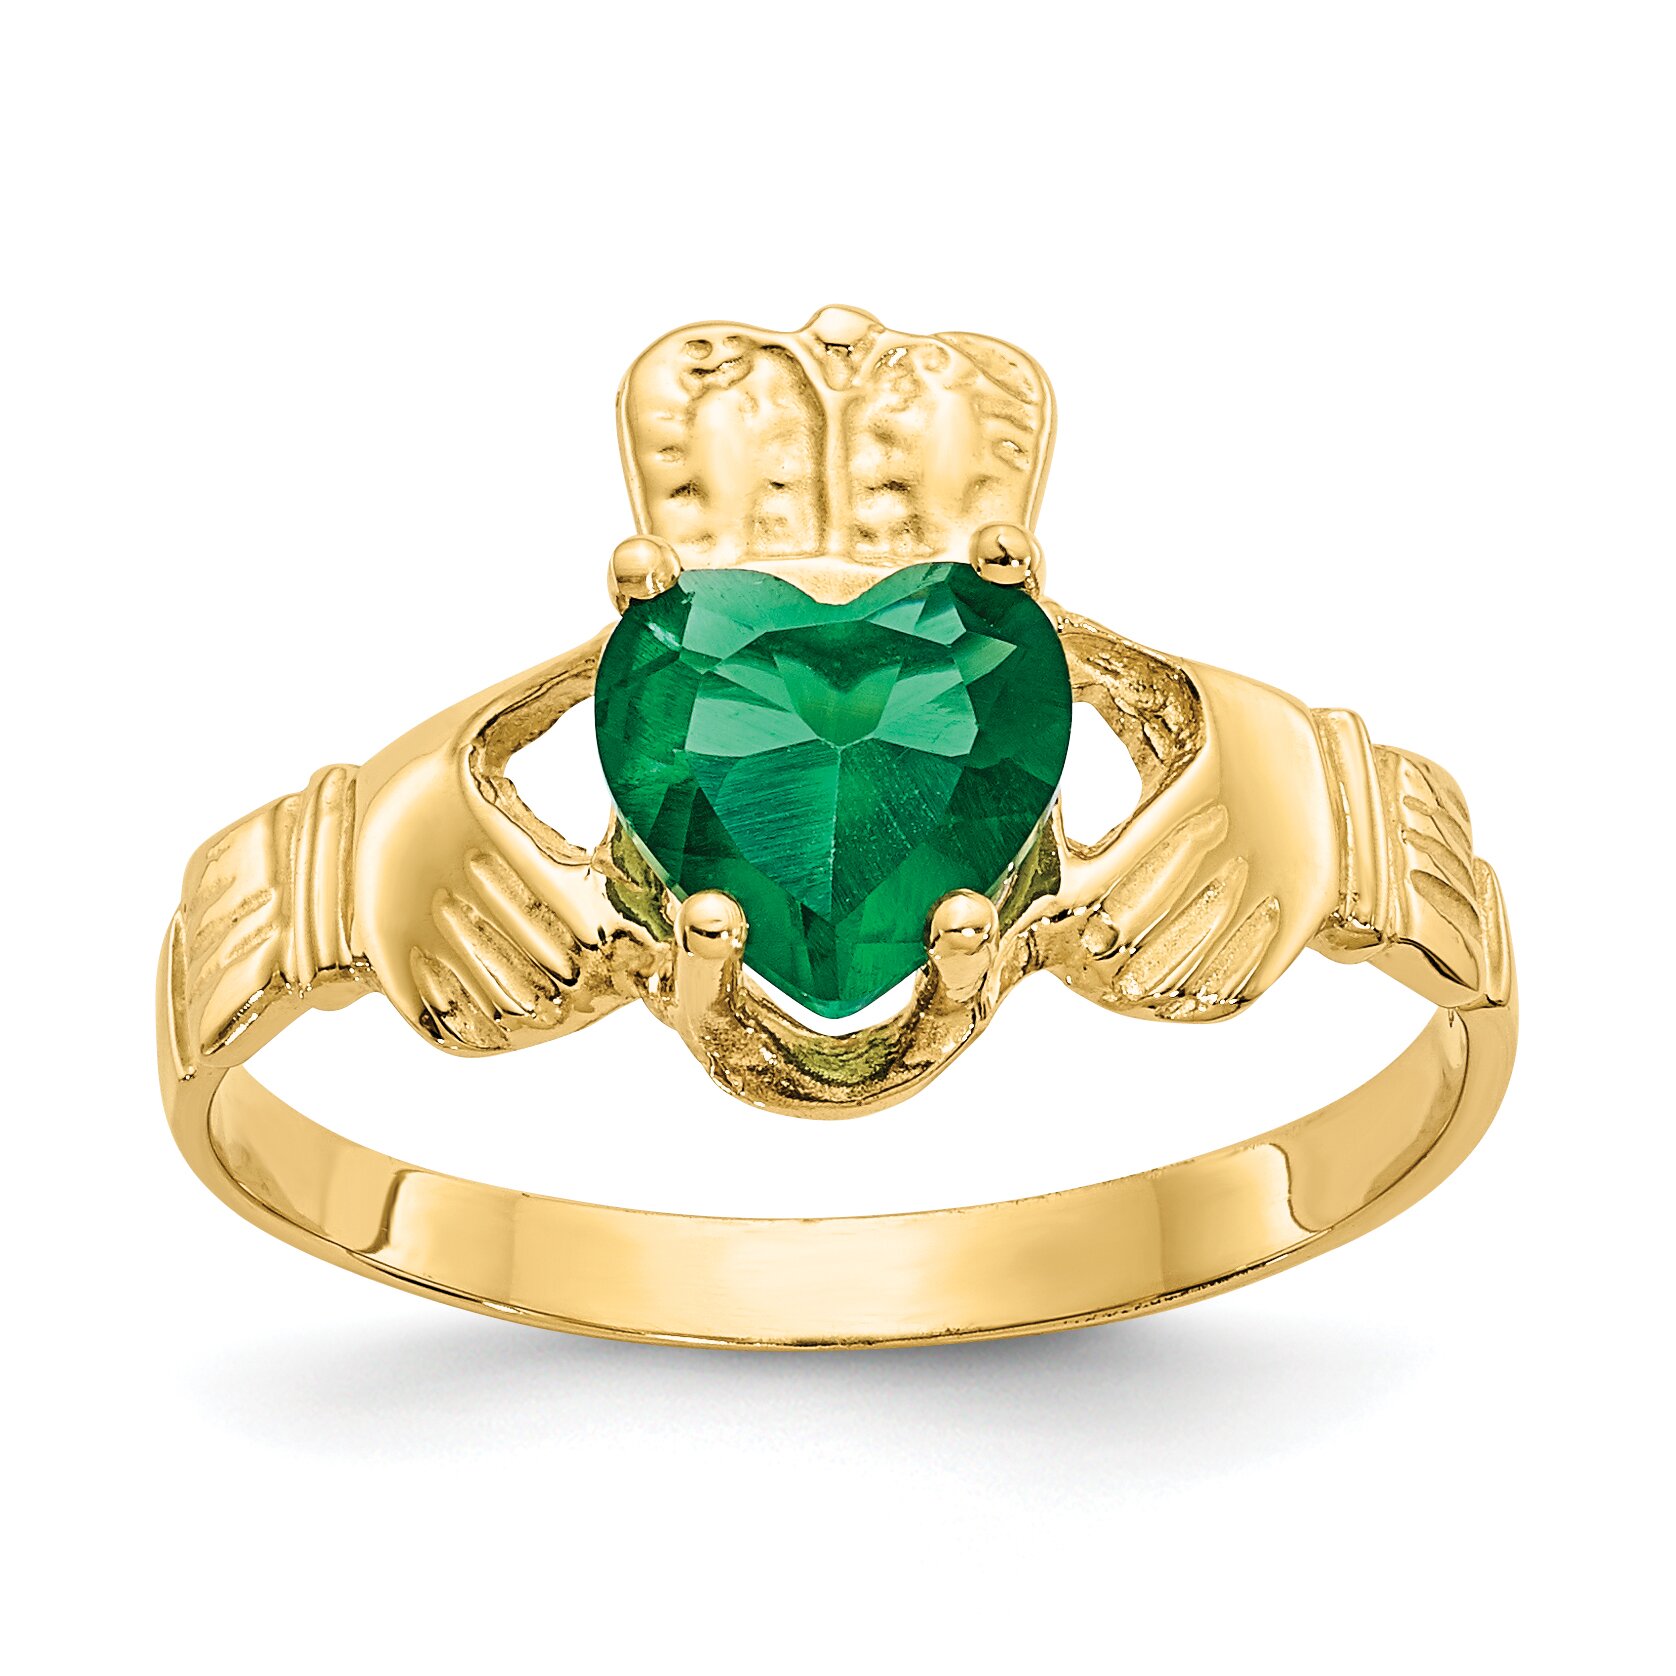 Findingking 14K Gold Cubic Zirconia May Birthstone Claddagh Ring